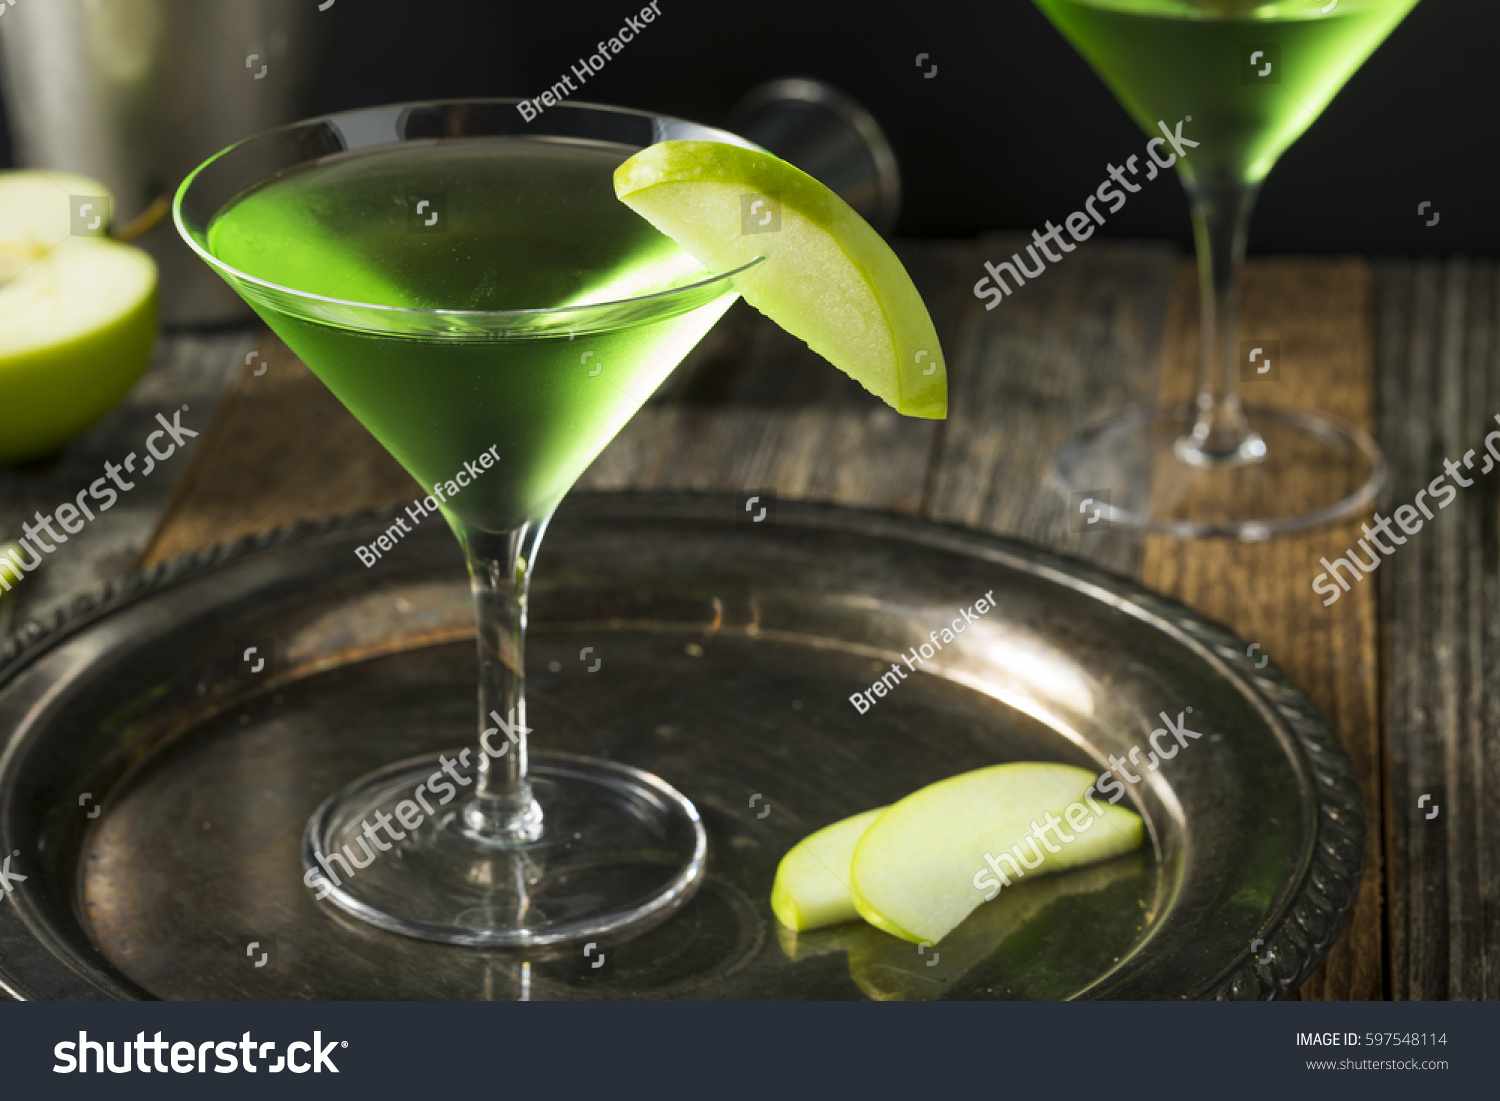 Homemade Green Alcoholic Appletini Cocktail with Apple Garnish #597548114